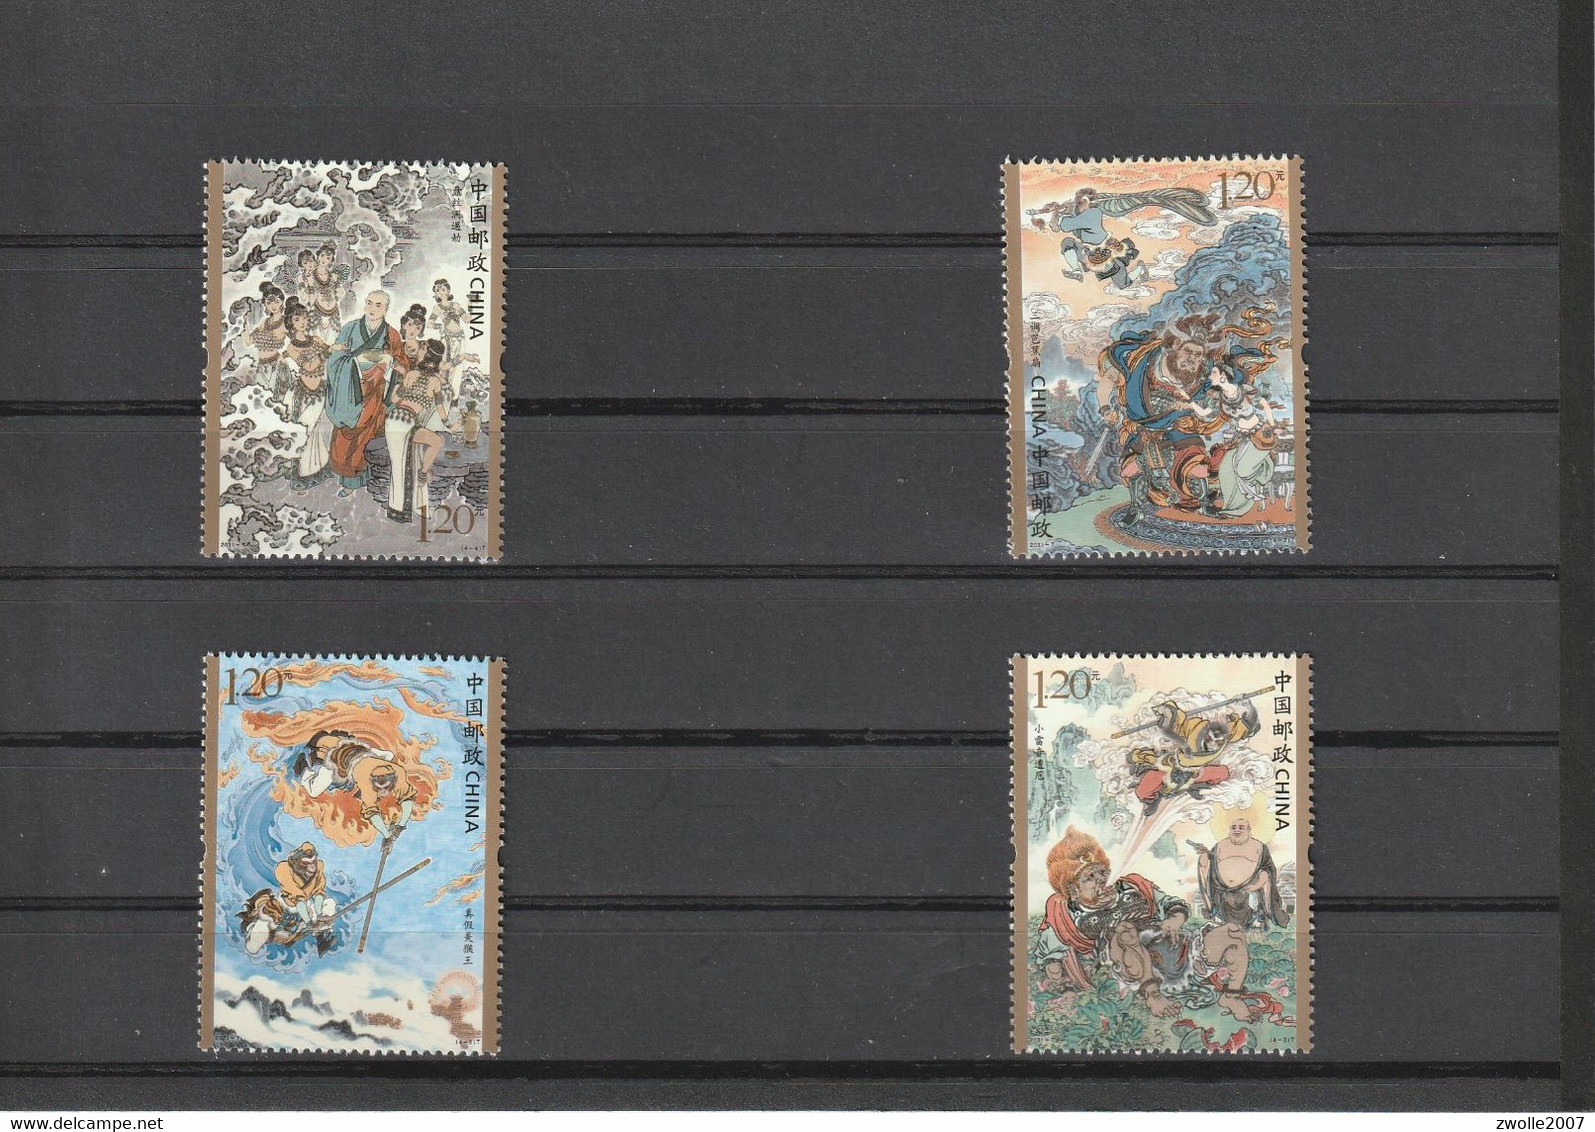 China 2021-7 Journey To The West (4) - One Of China's Famous Classical Literary Works - Unused Stamps